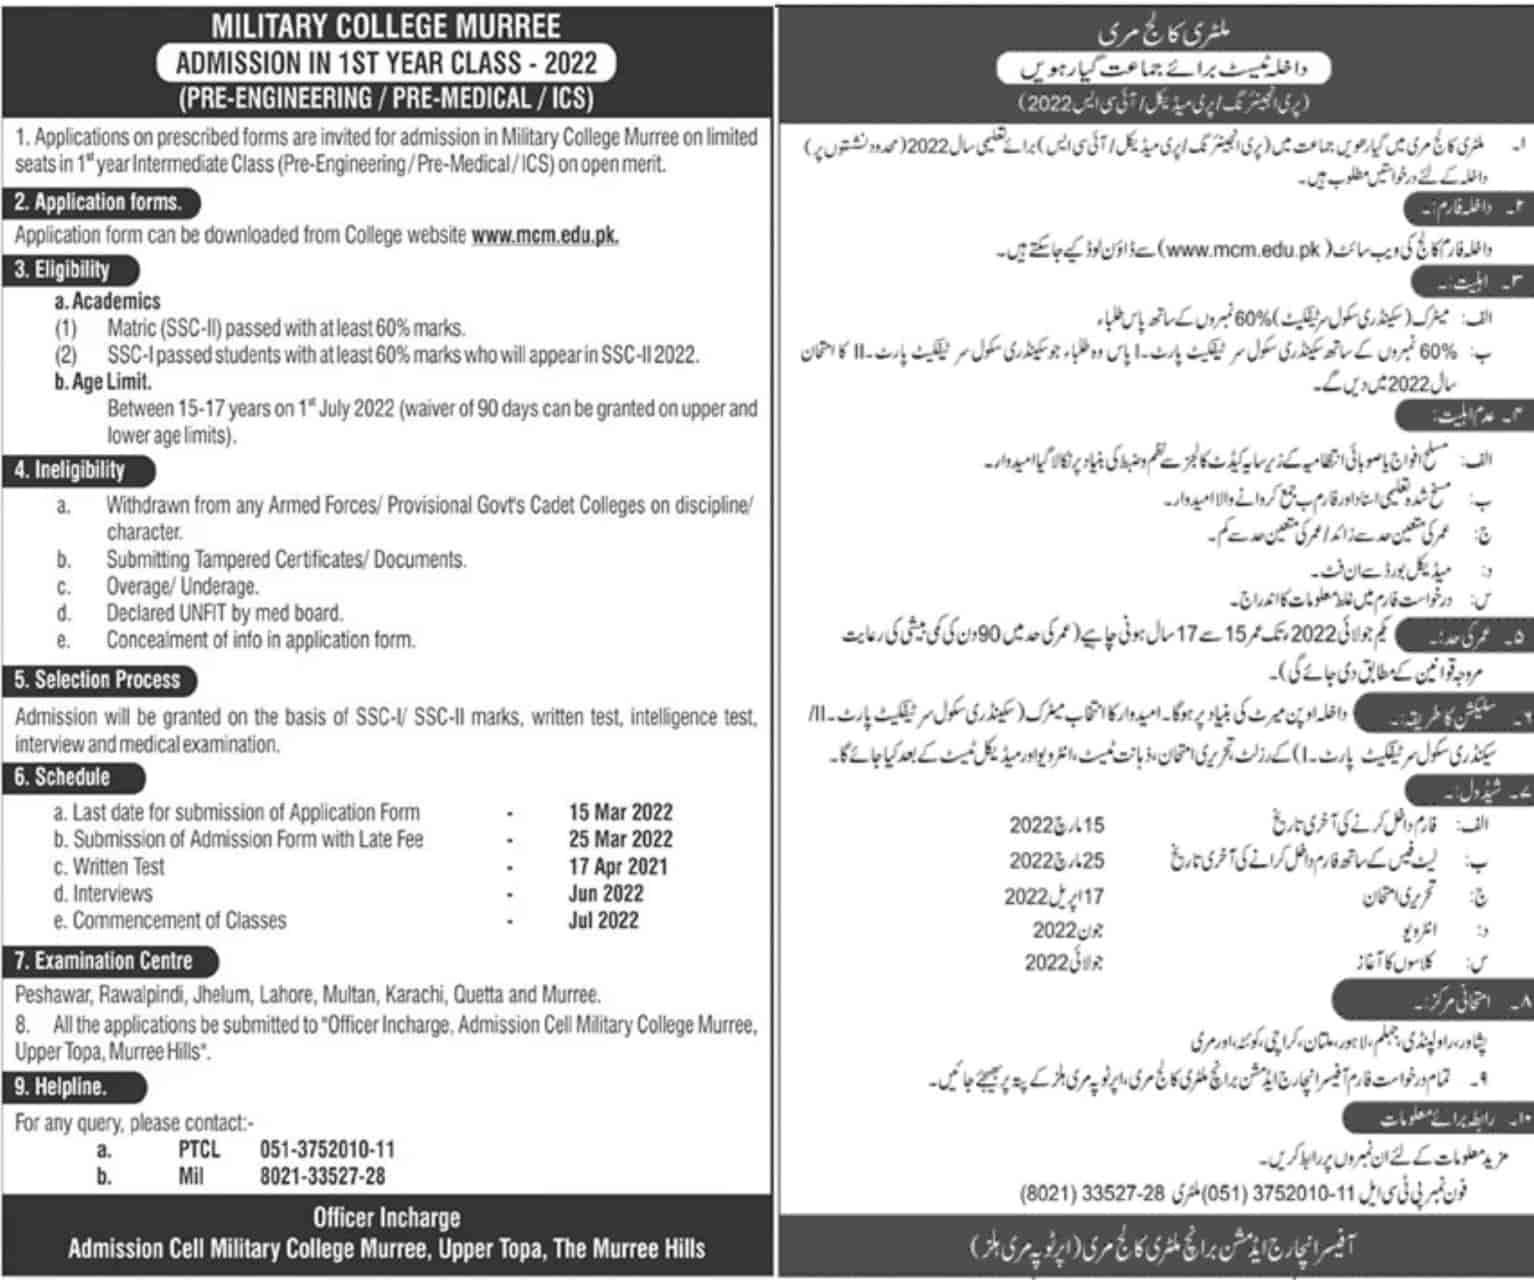 Military College Murree Admission 2022 1st Year Class - Pakistan Jobs